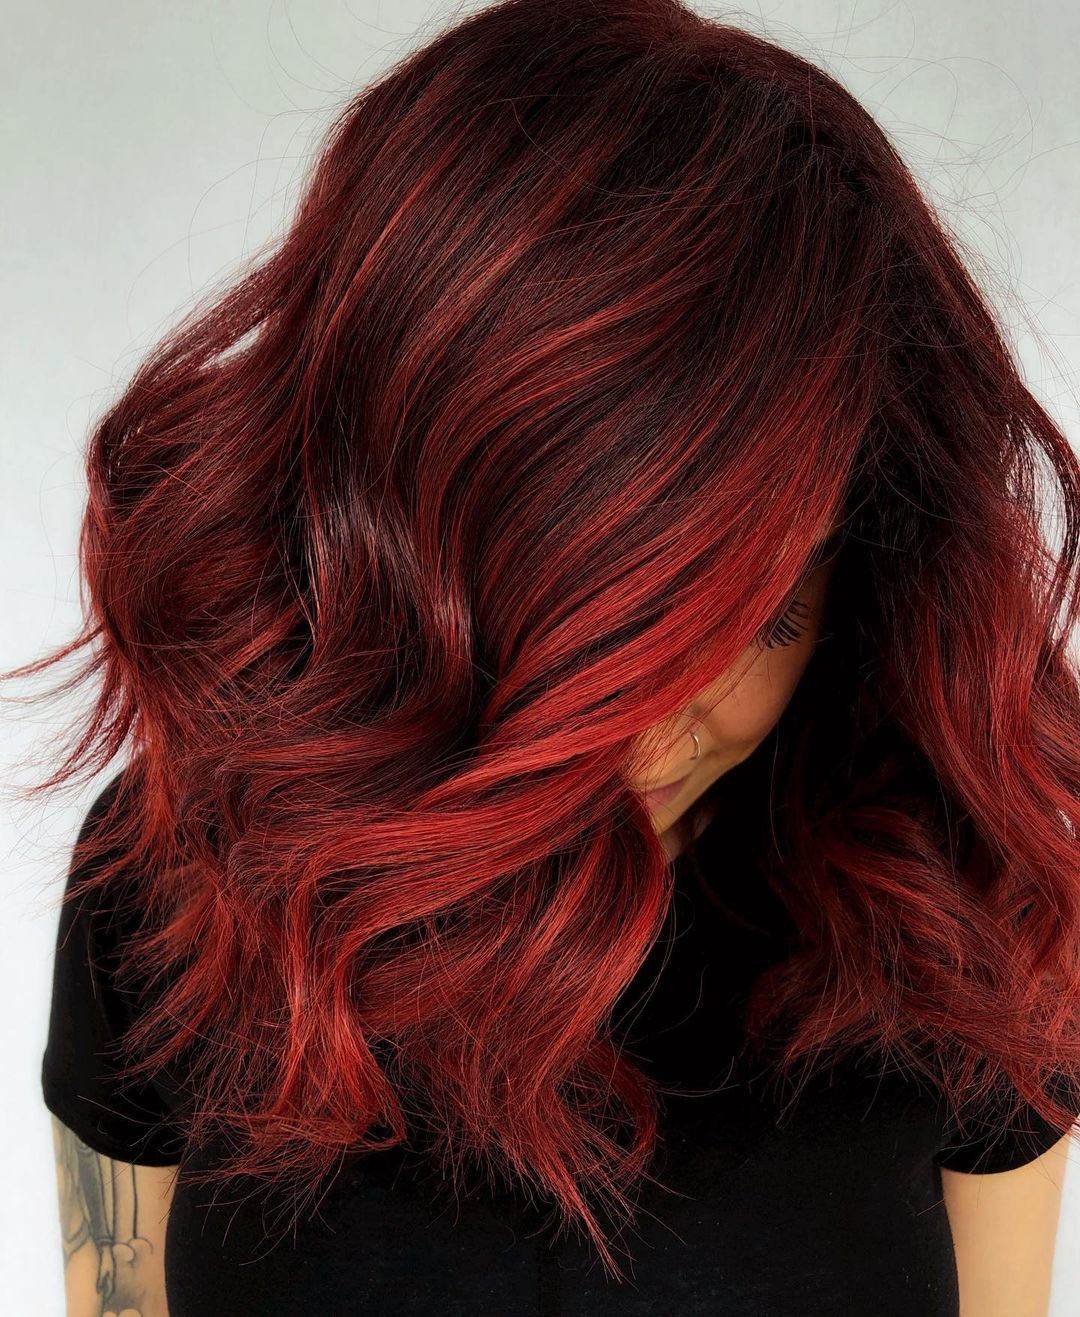 20 Splendid Dark Red Hair Color Ideas – The Right Hairstyles